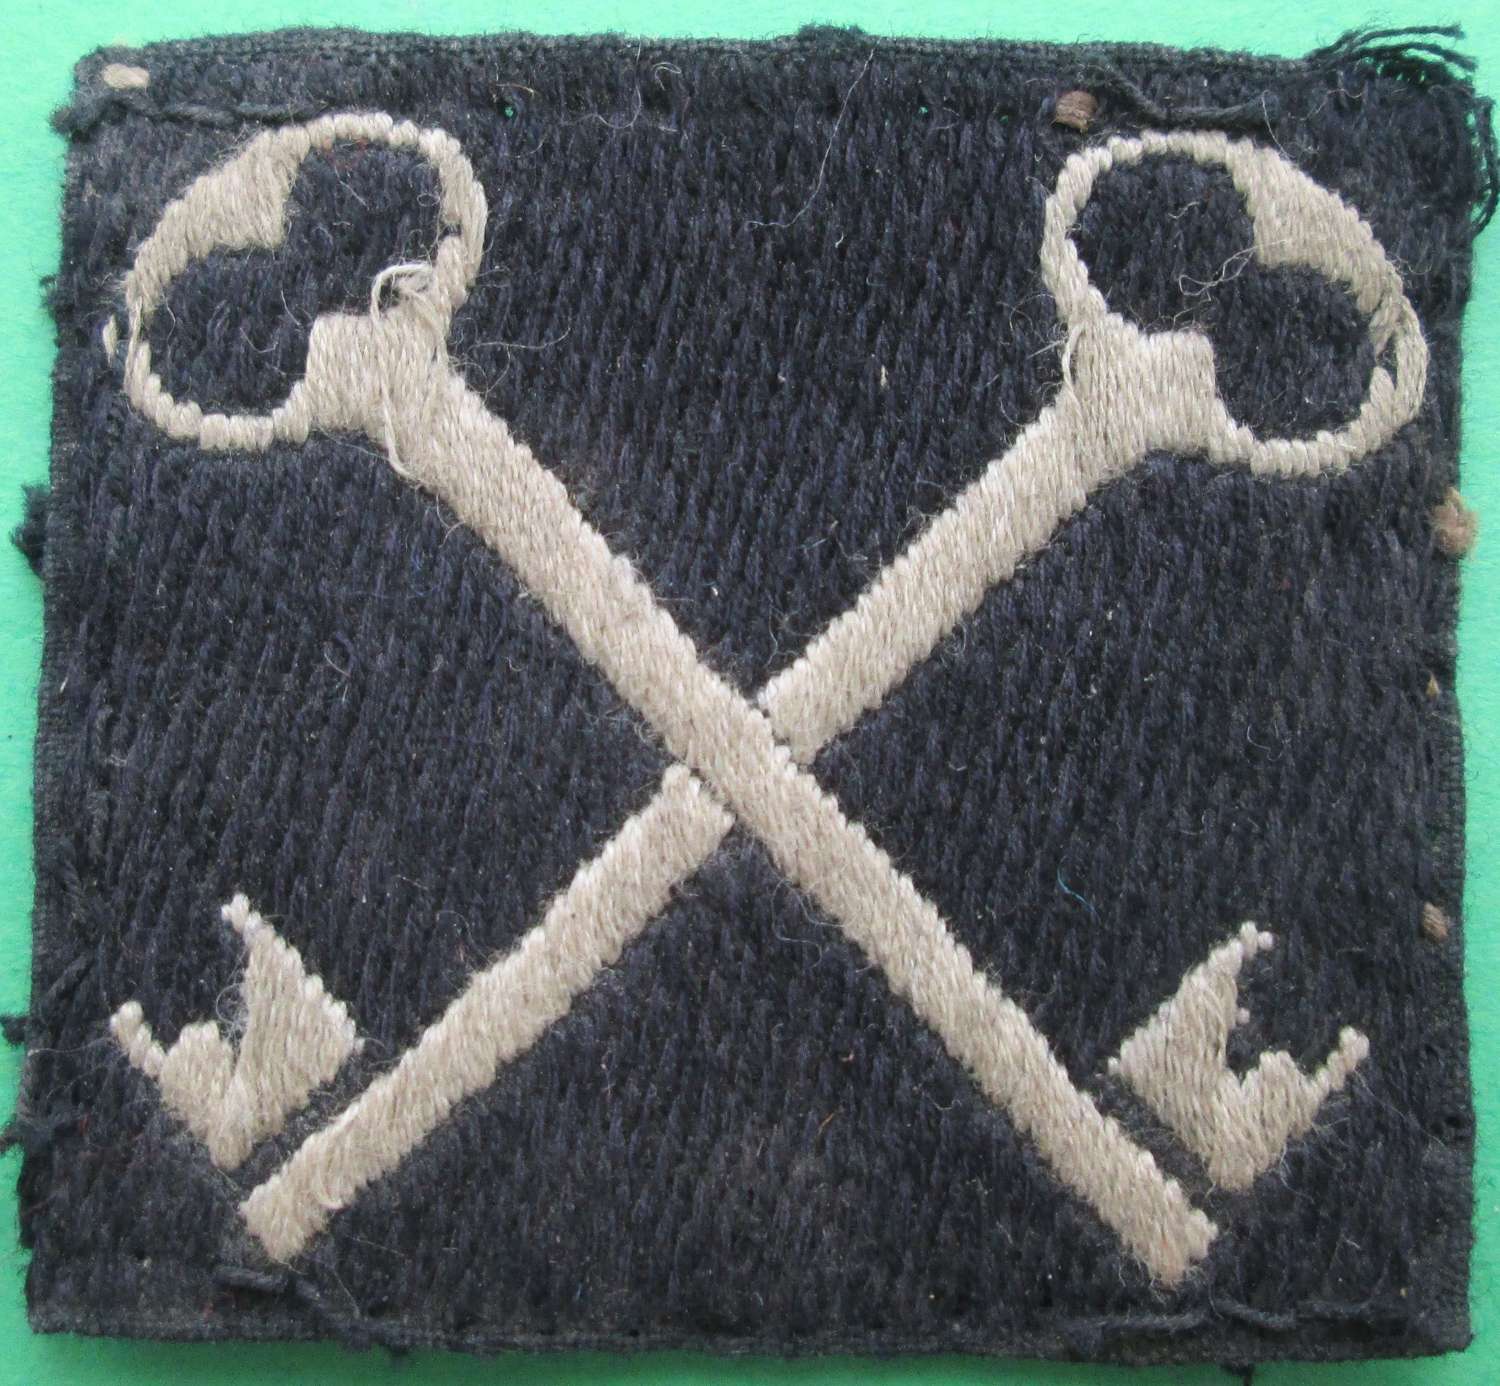 A SECOND INFANTRY DIVISION FORMATION PATCH